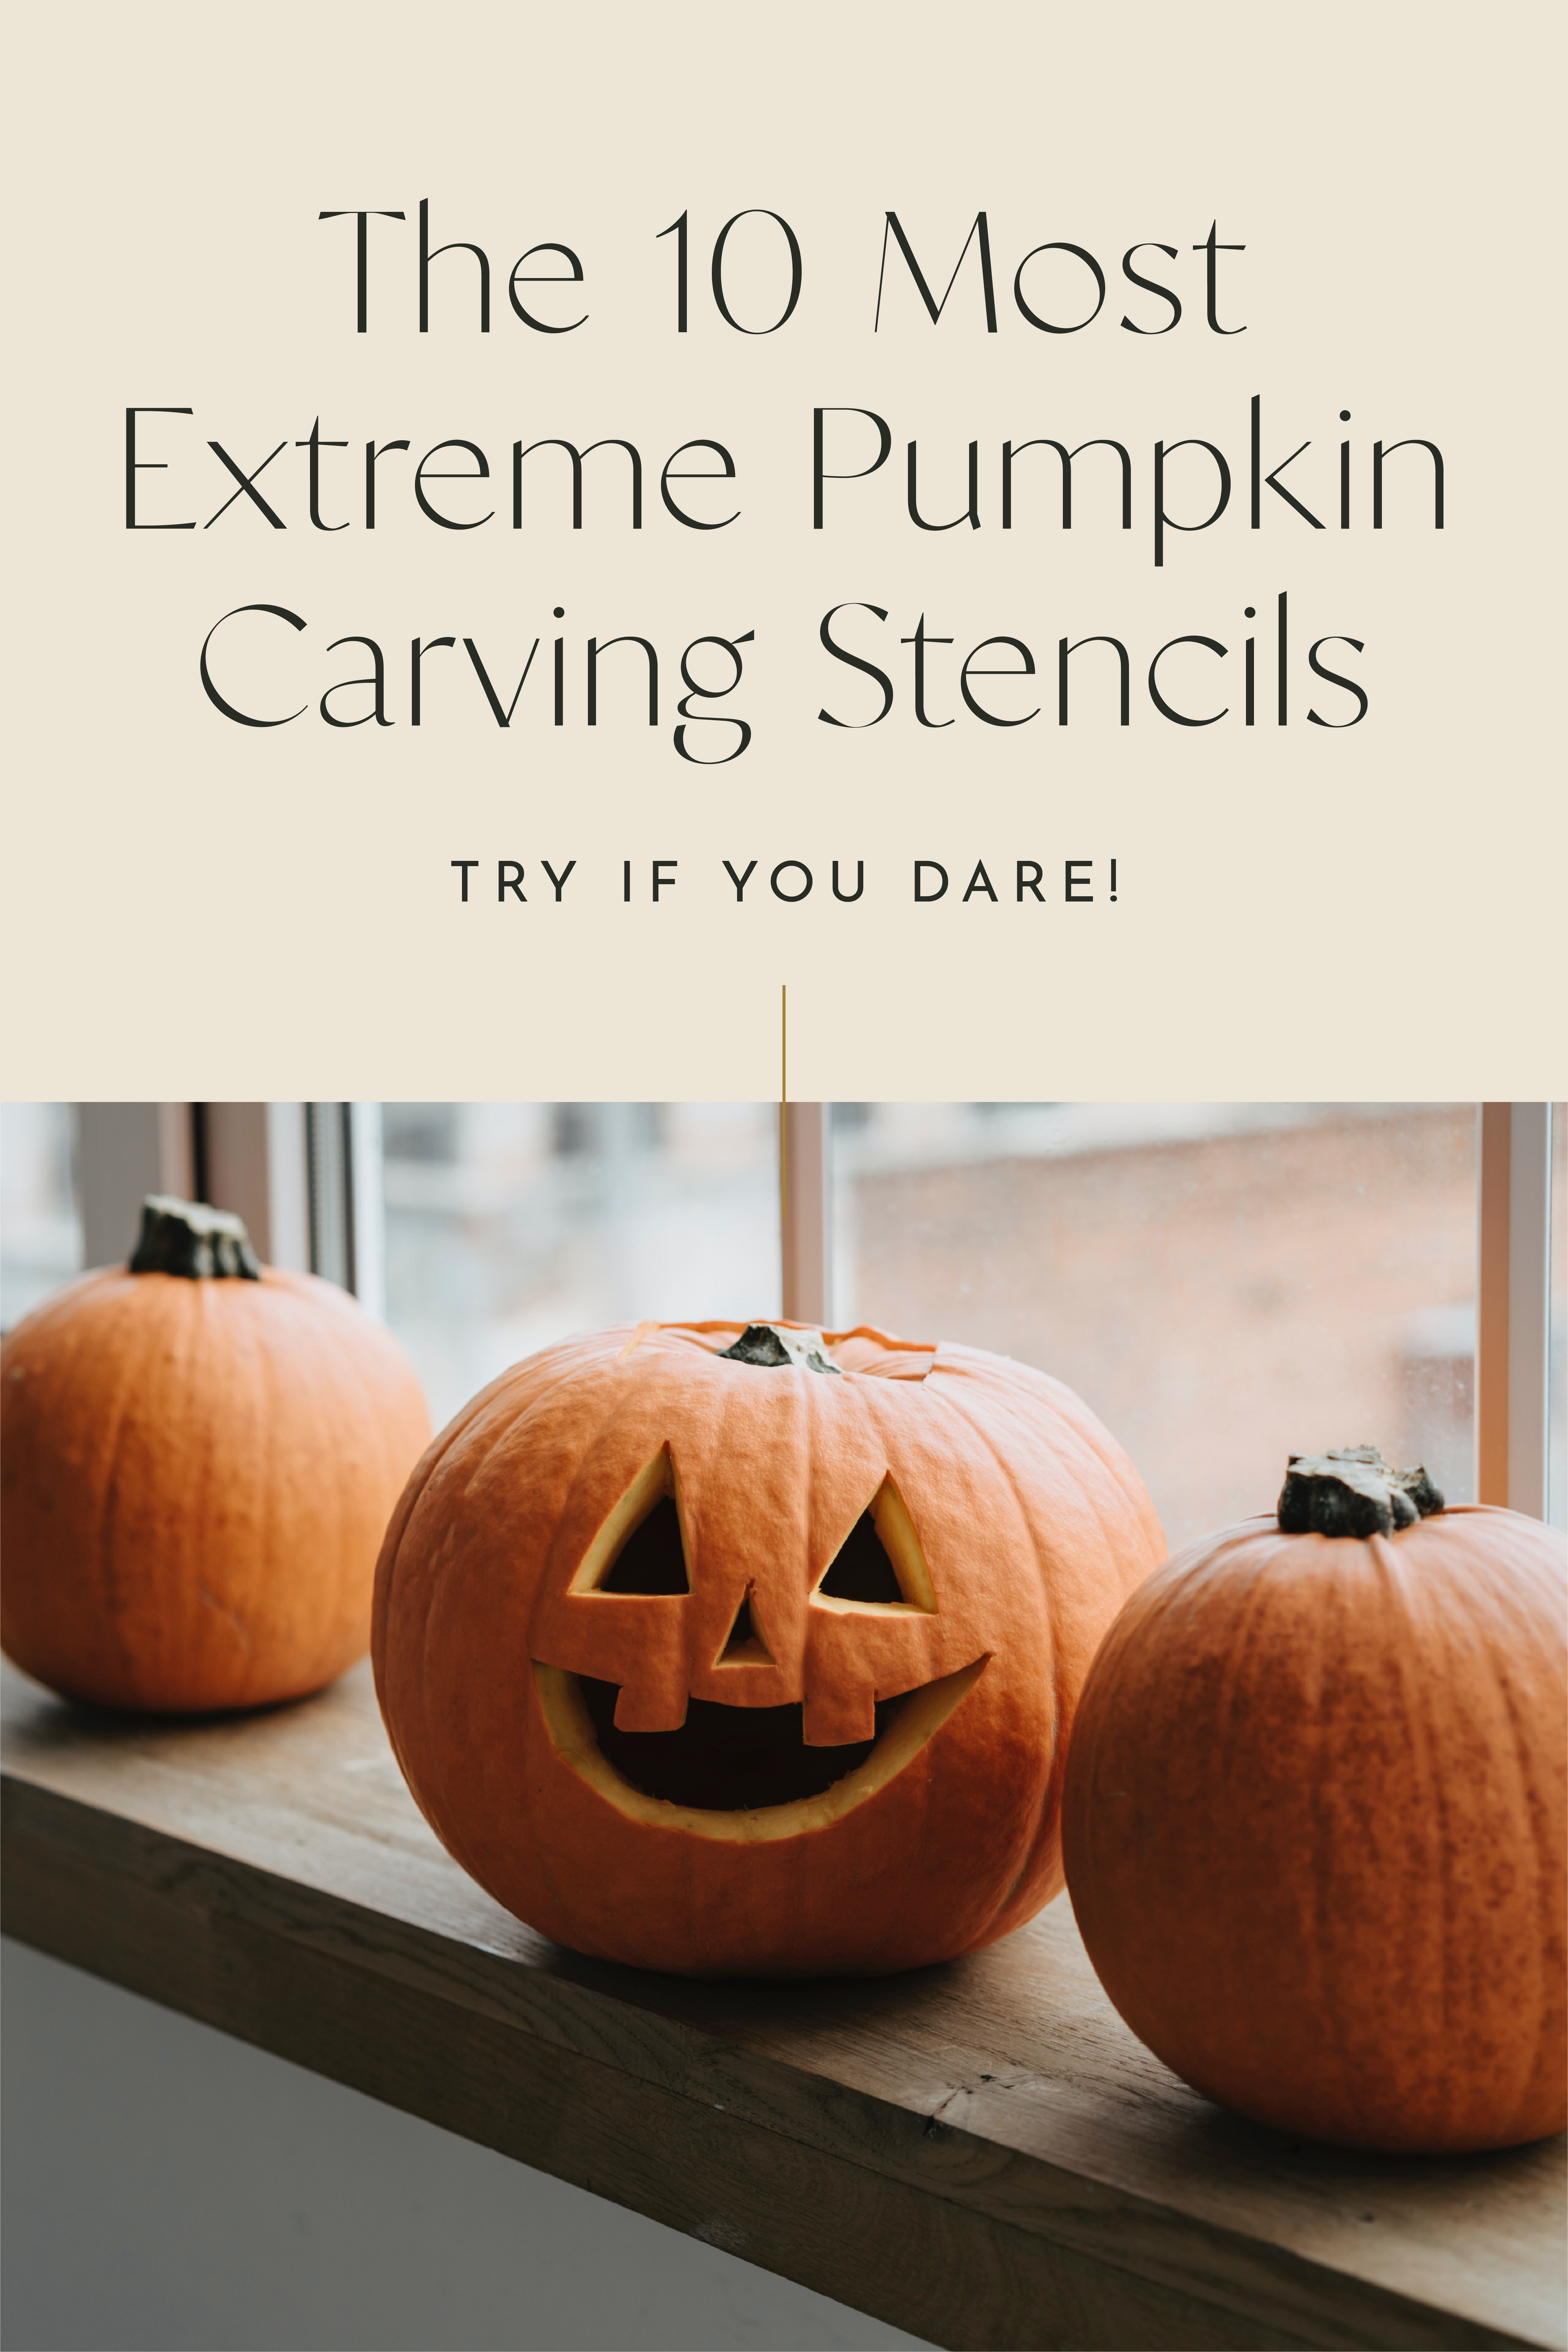 The 10 Most Extreme Pumpkin Carving Stencils - Try if You Dare! 1